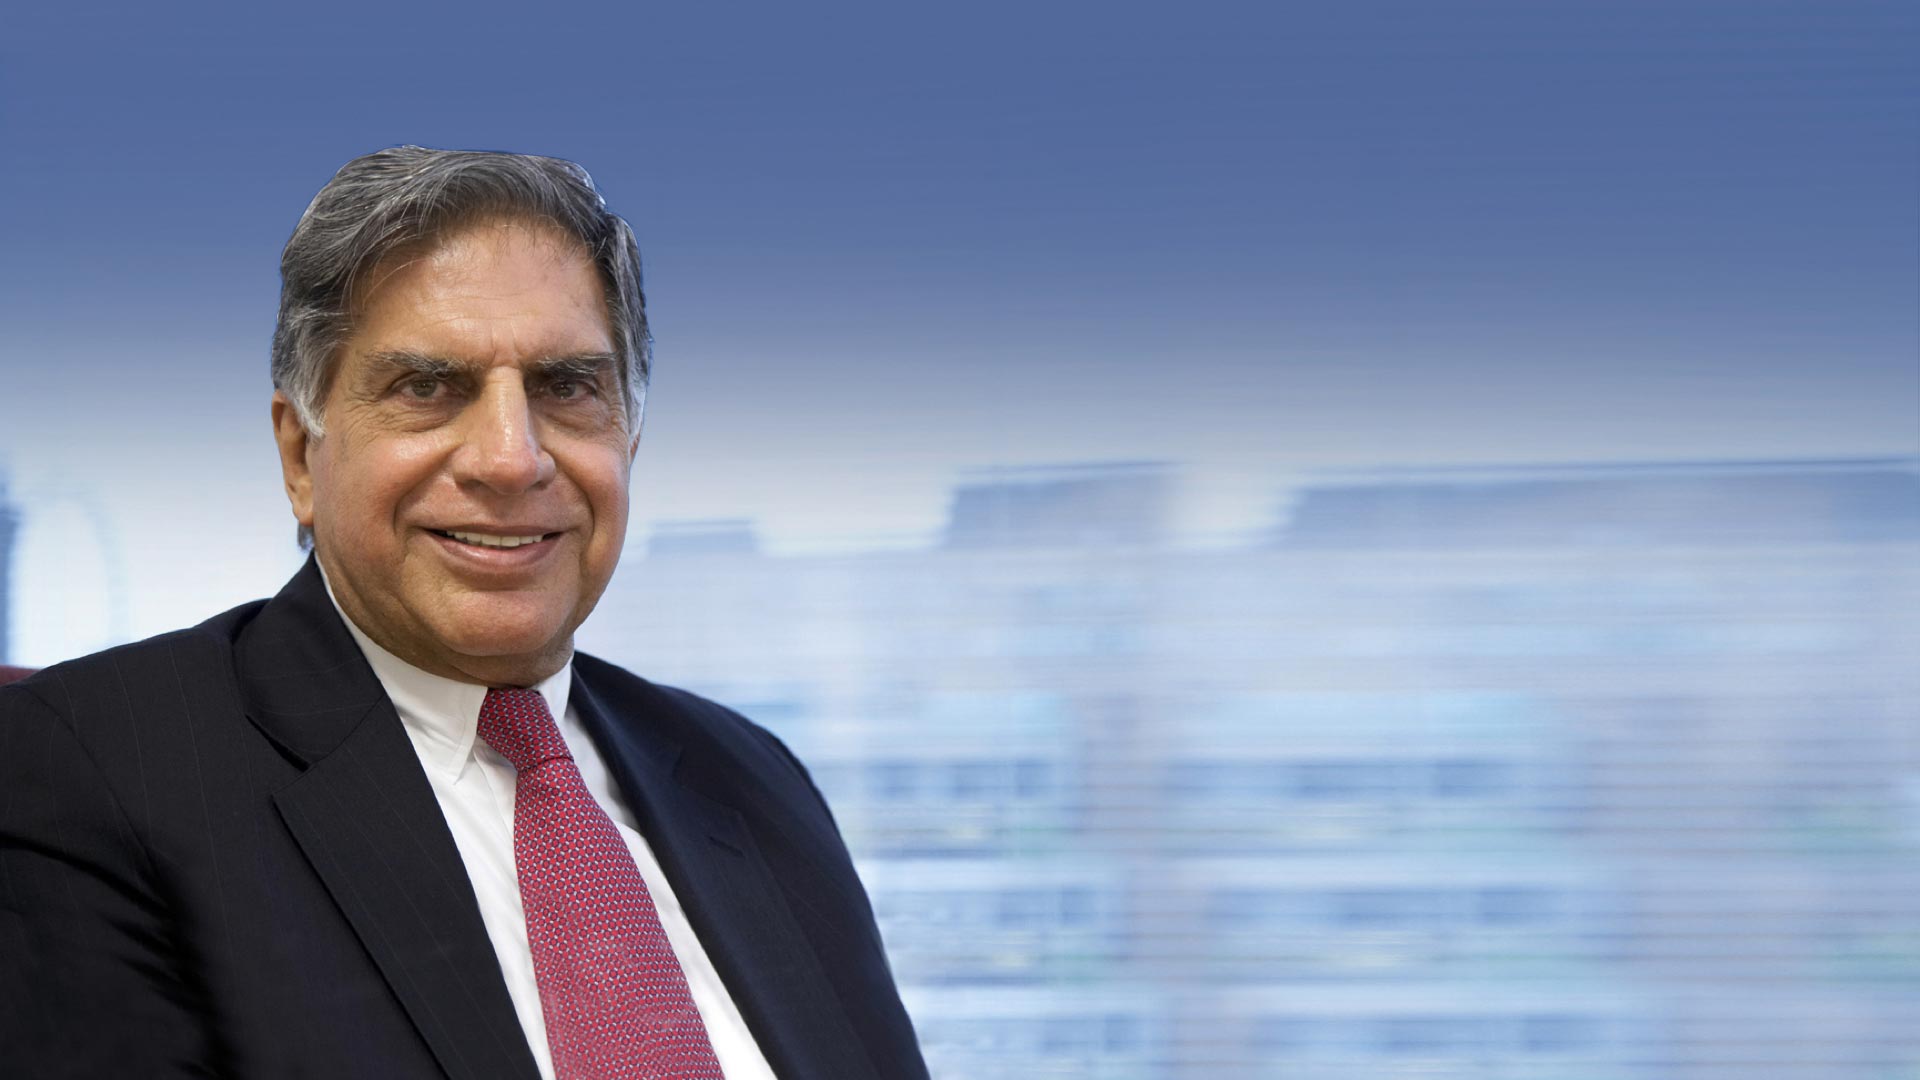 10 Interesting facts about Ratan Tata that you should know